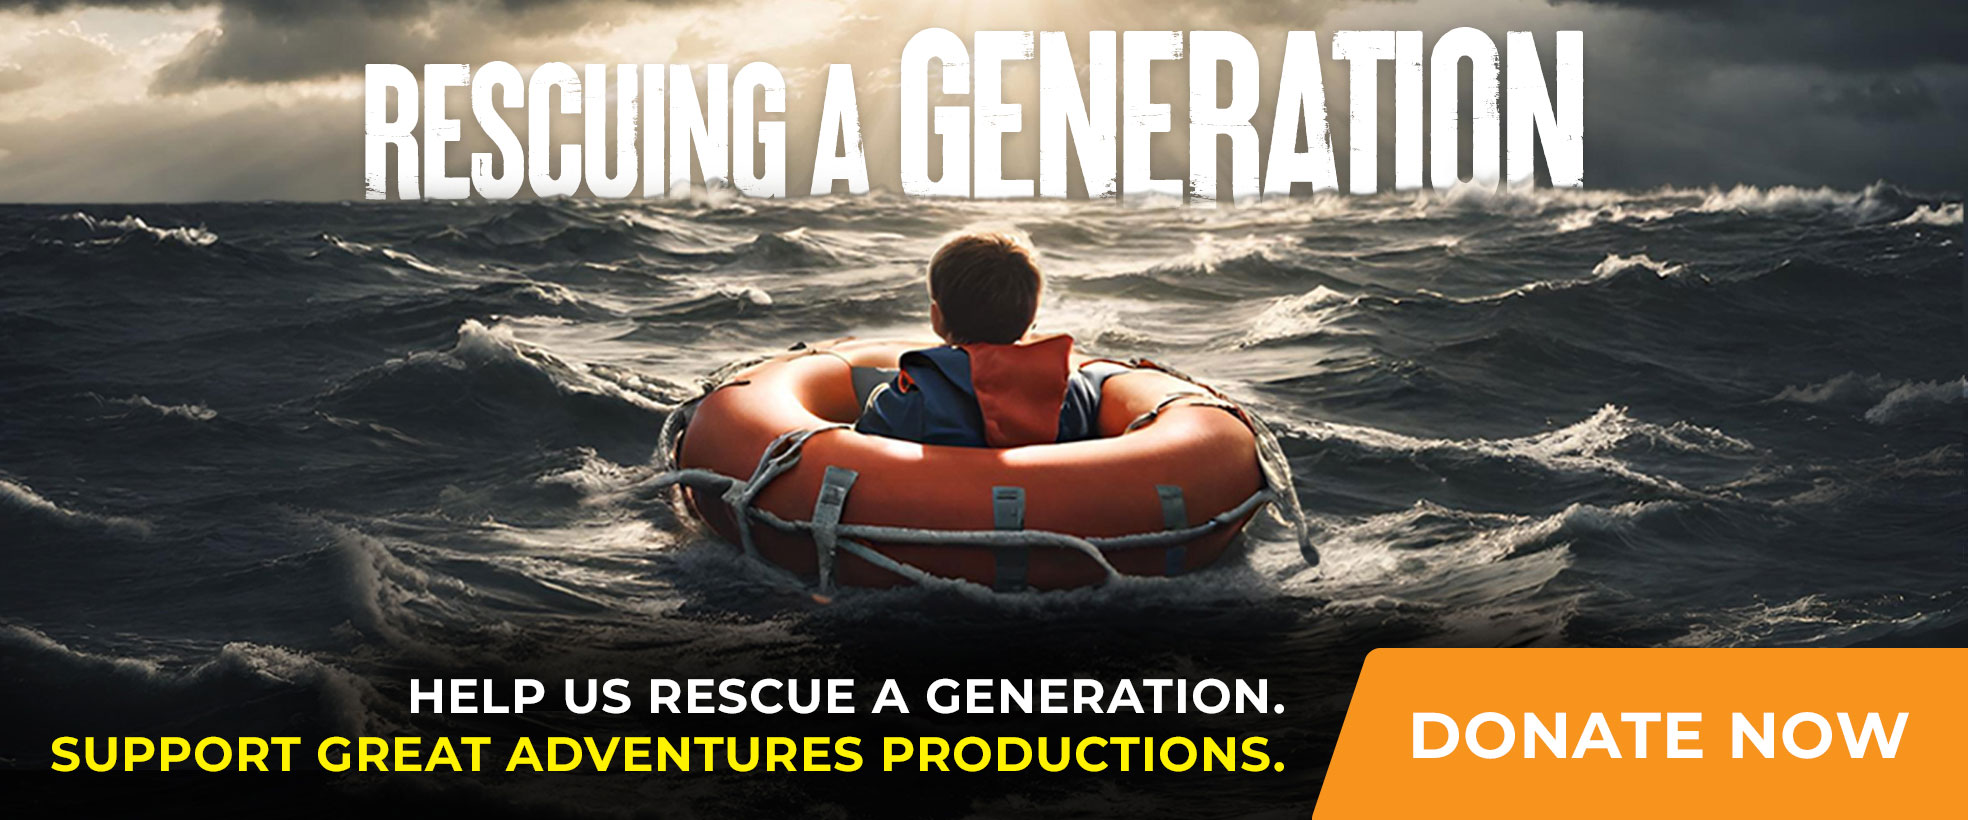 Rescuing a Generation